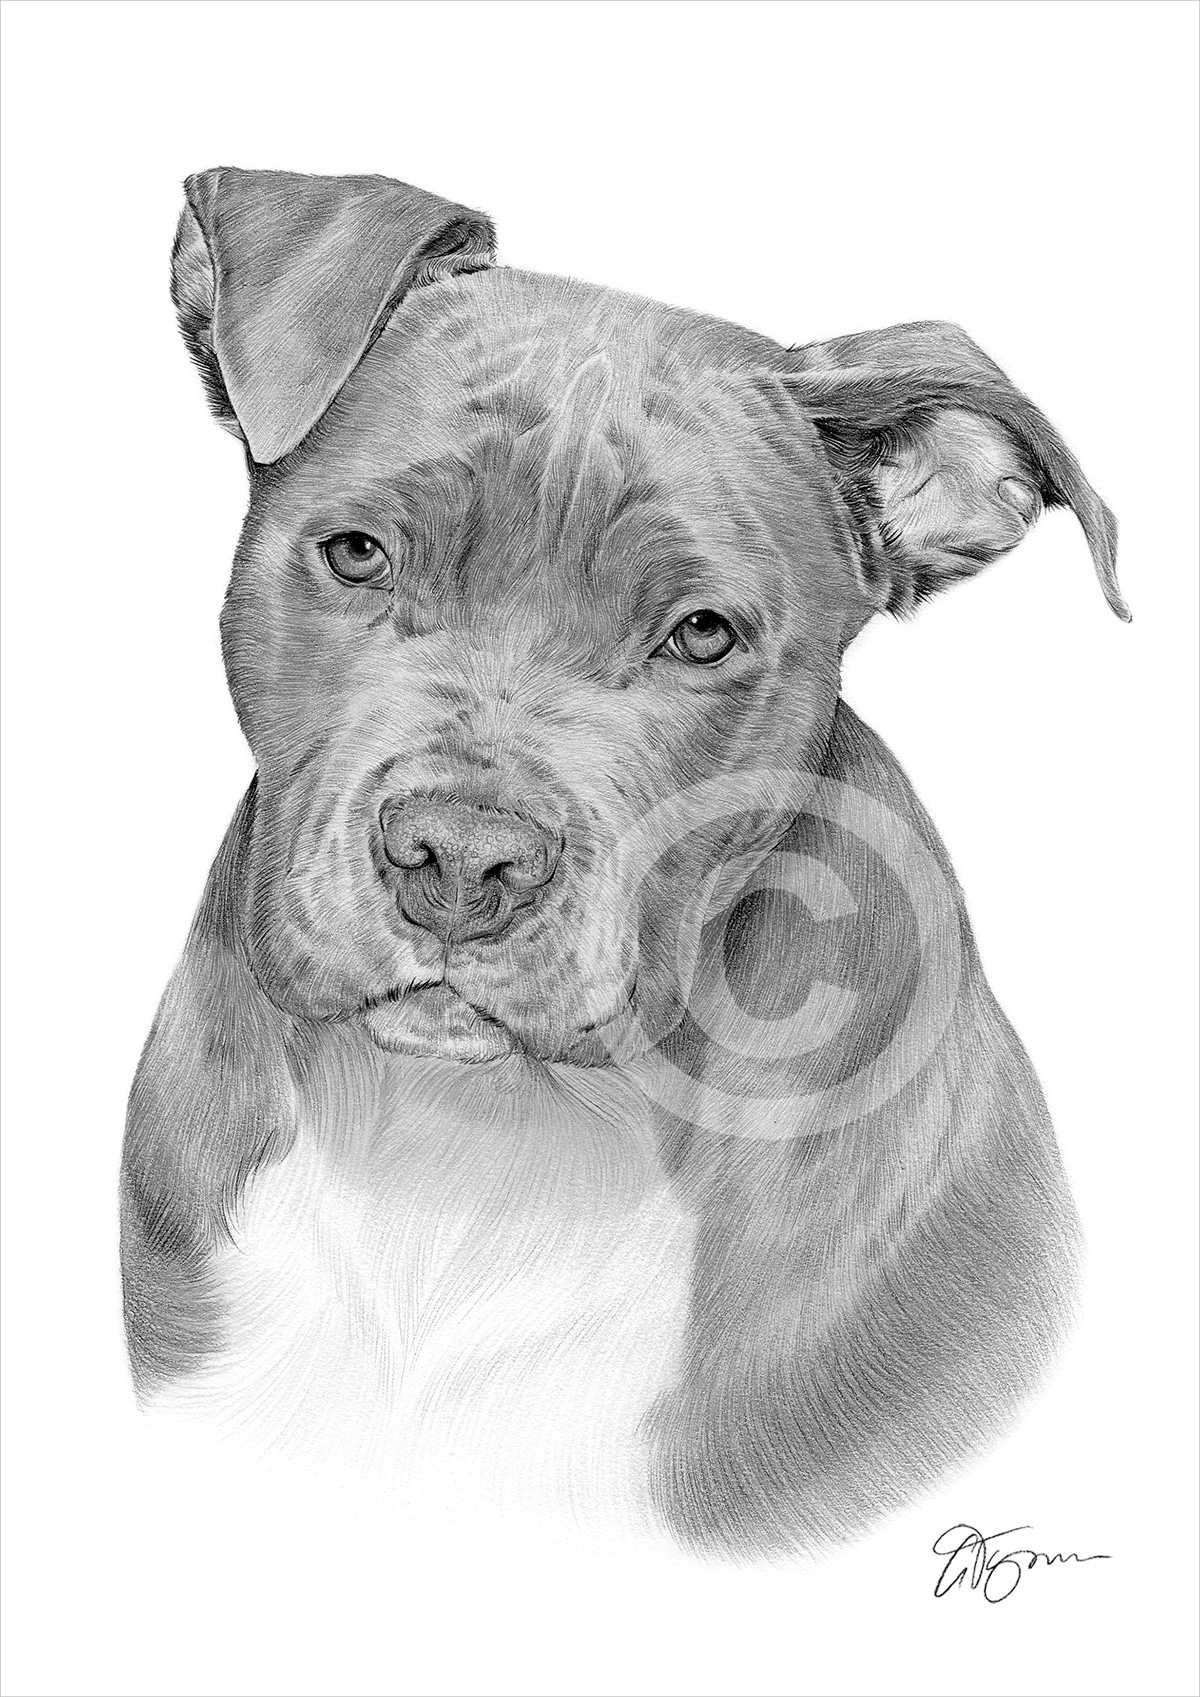 40+ Best Collections Pitbull Dog Drawings In Pencil The Campbells